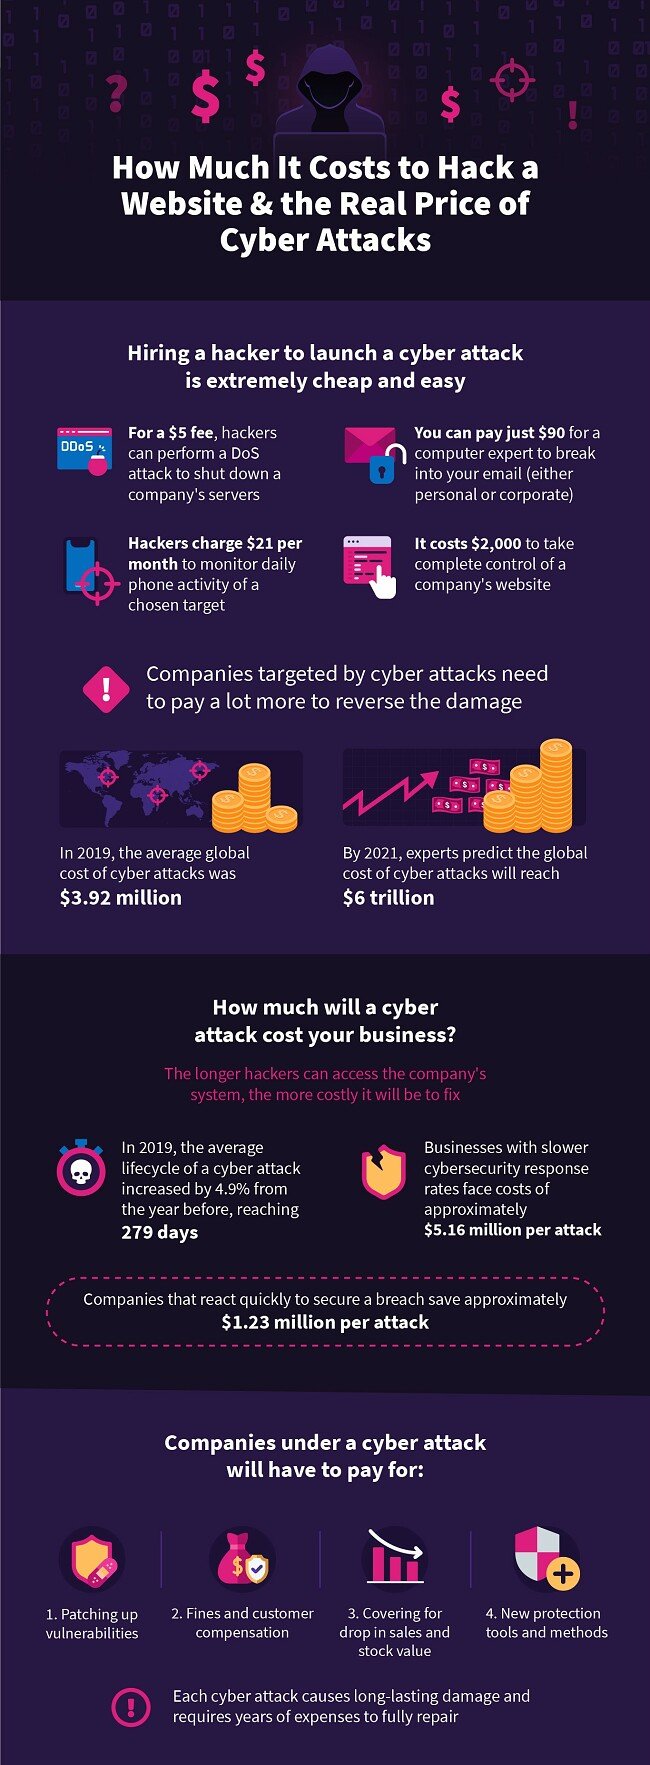 Infographic presentation showing data on different impacts on managing the costs of a cyber attack and cleaning after one